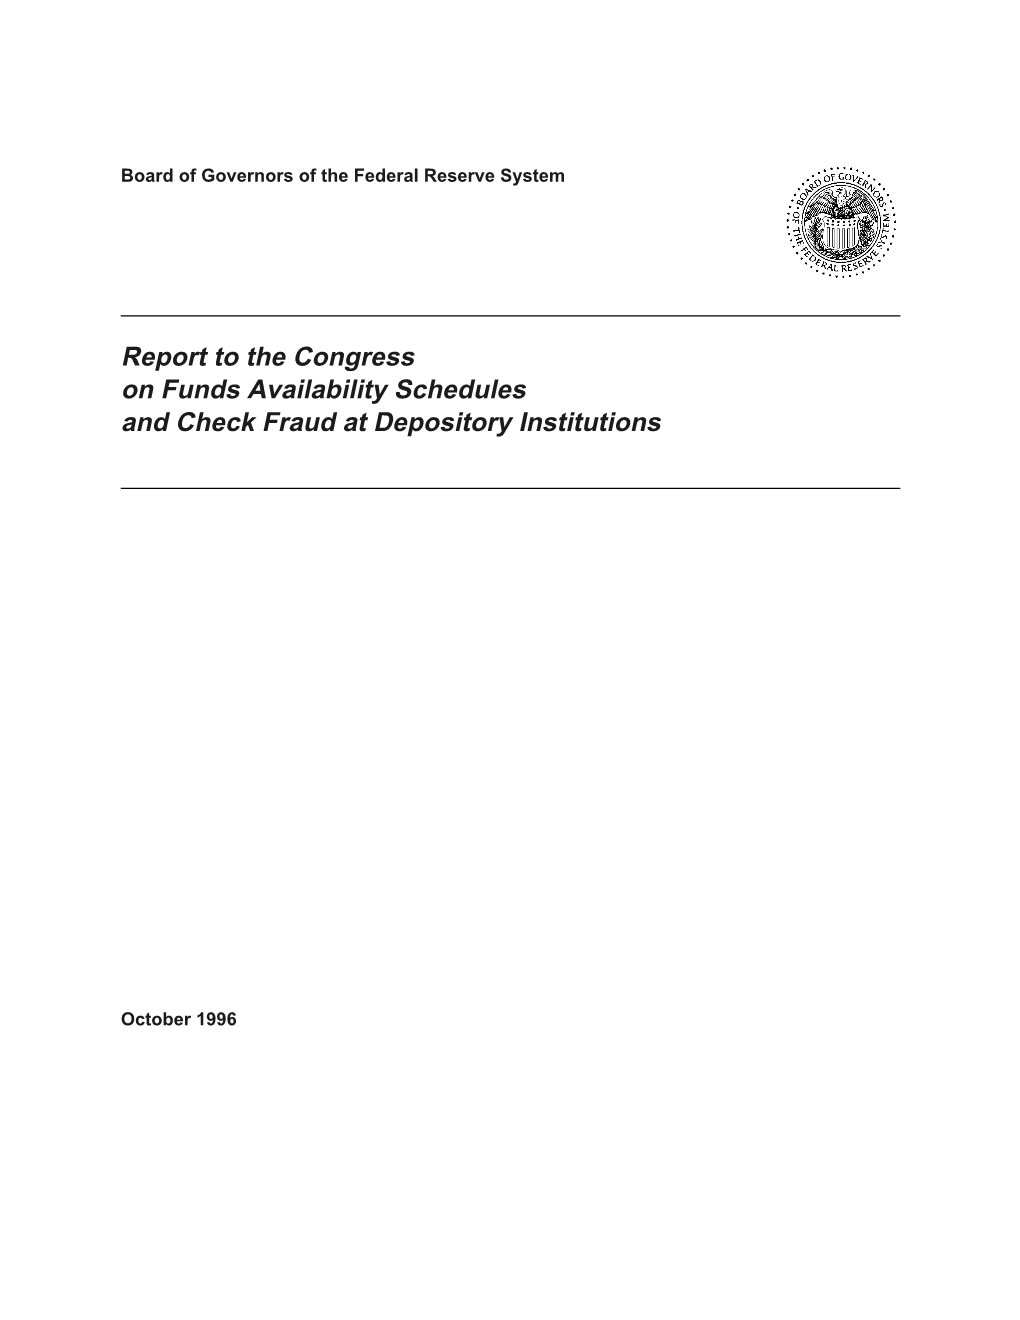 Report to the Congress on Funds Availability Schedules and Check Fraud at Depository Institutions